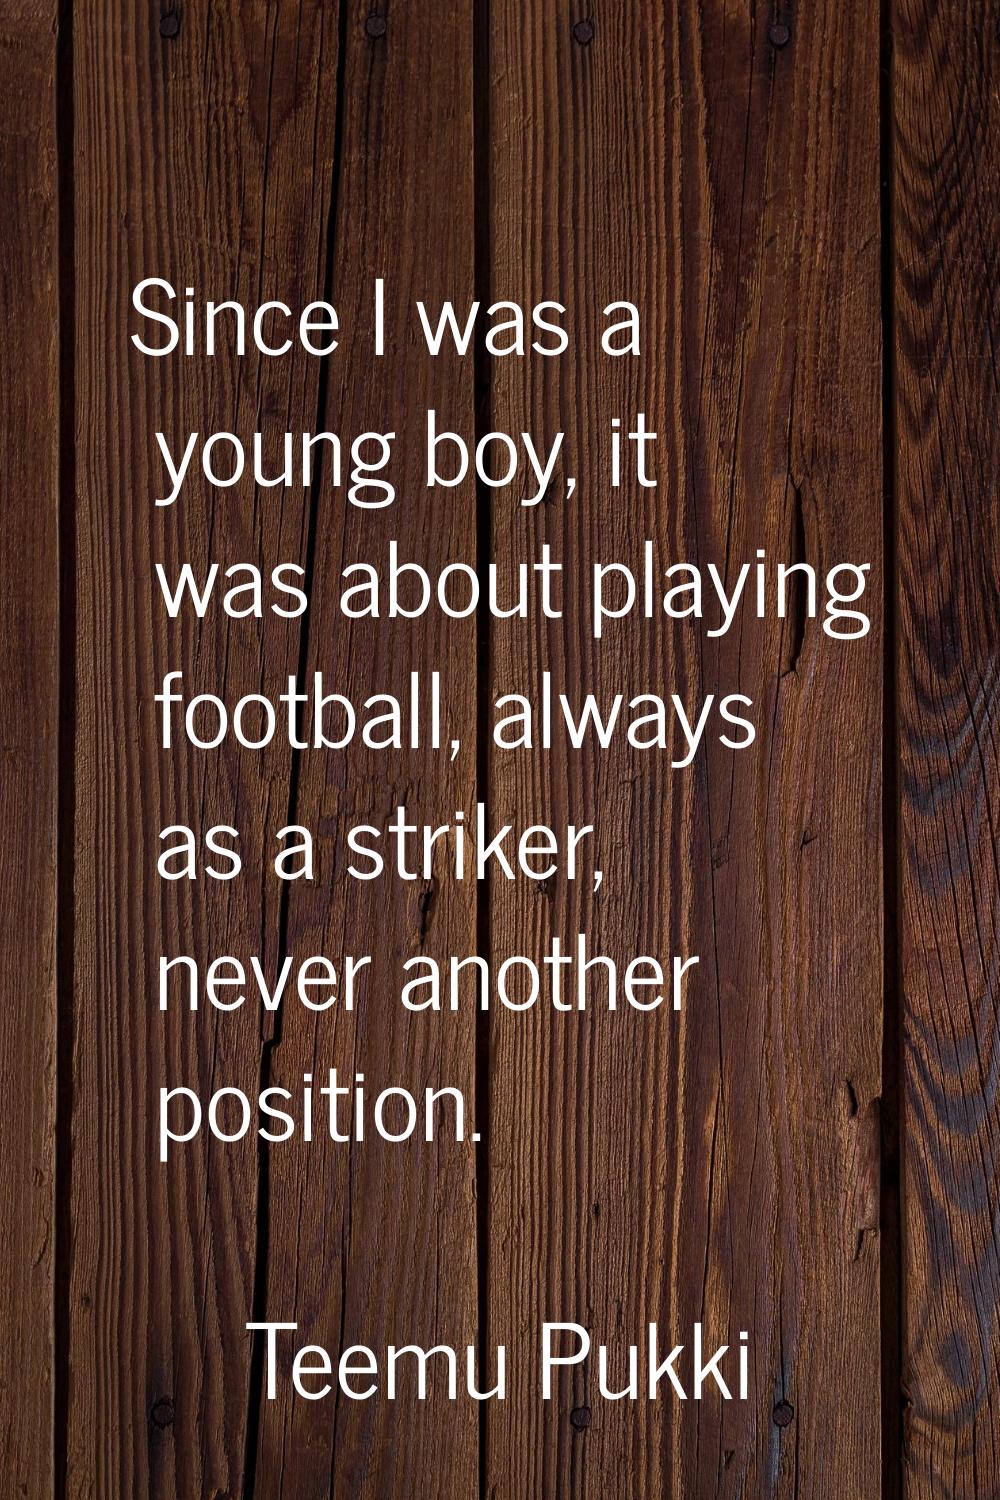 Since I was a young boy, it was about playing football, always as a striker, never another position